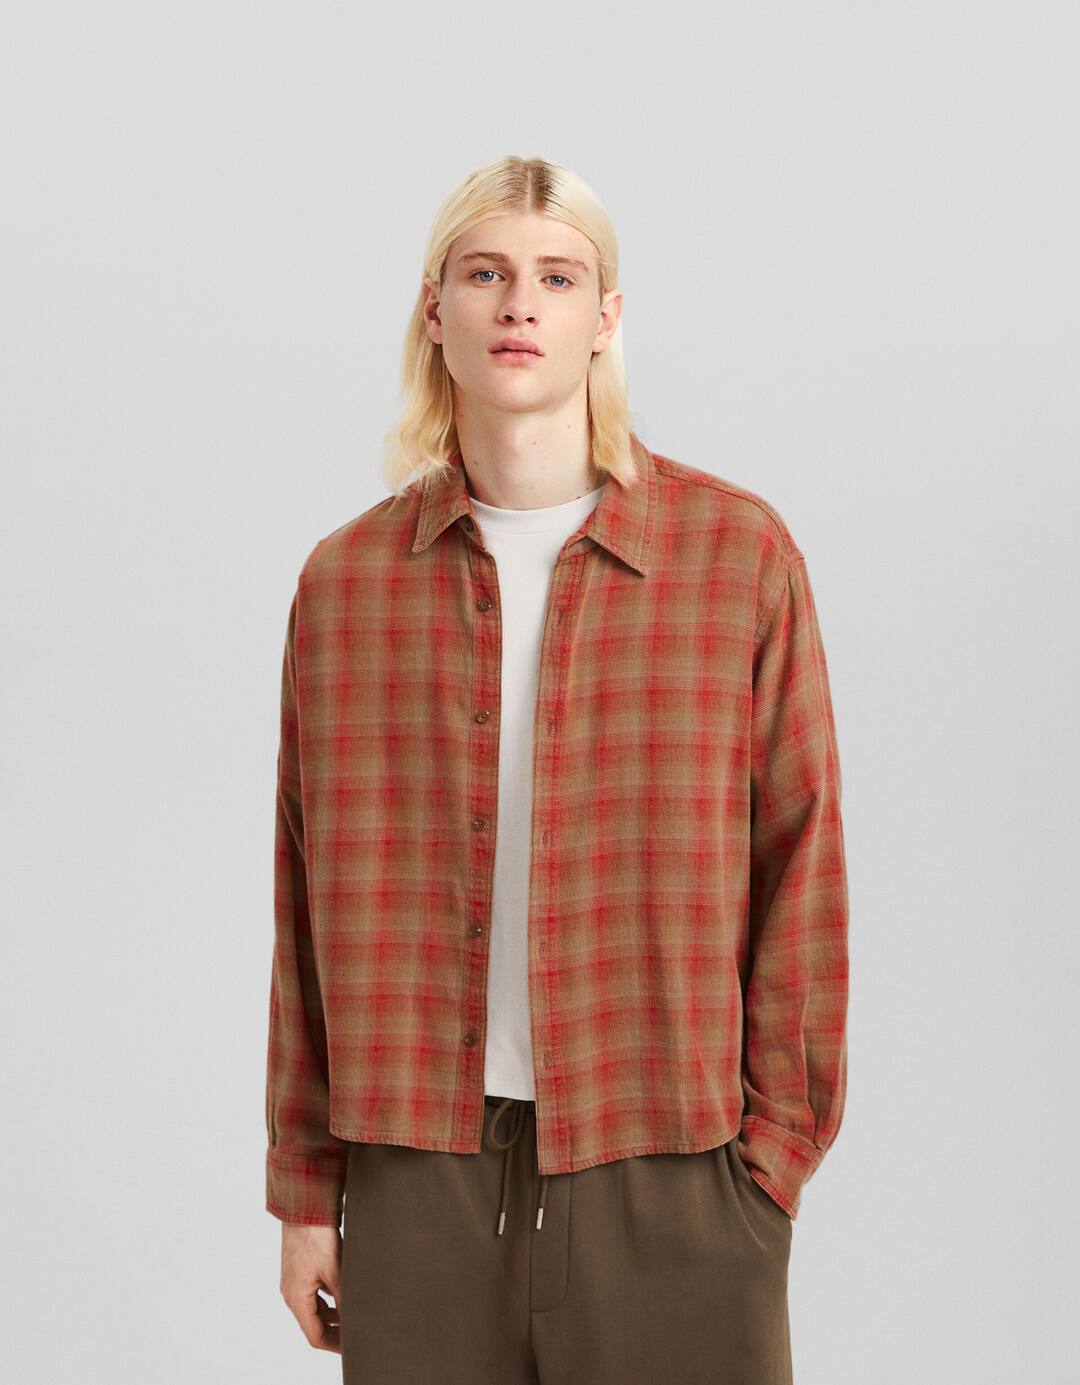 Faded-effect long sleeve check shirt